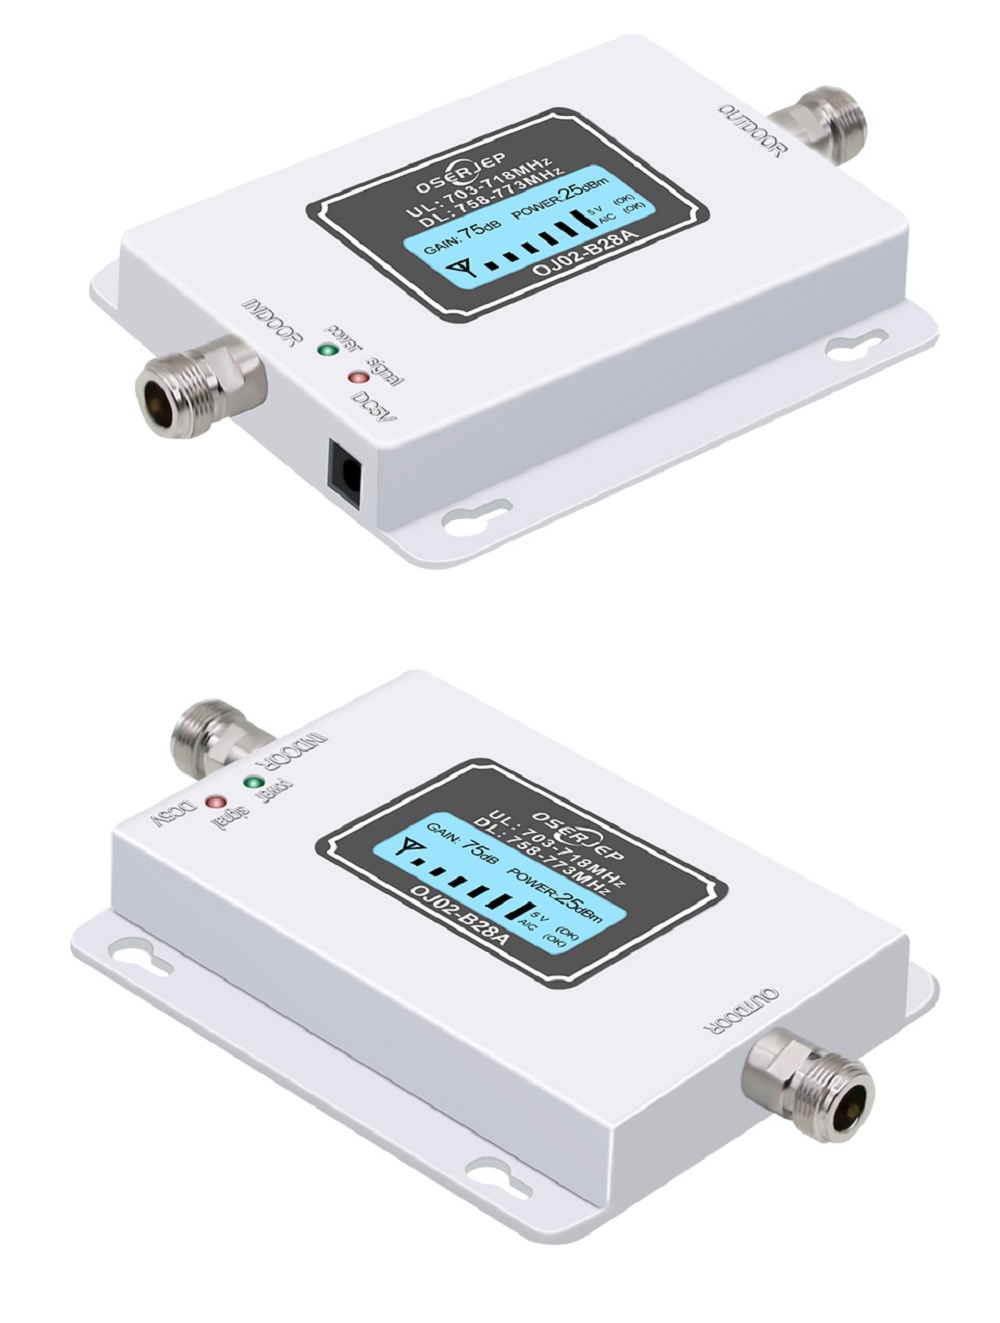 LCD-LTE-700MHz-B28A-4G-Phone-Signal-Boosters-Mobile-Phone-Repeater-Not-Include-Antenna-1598268-4